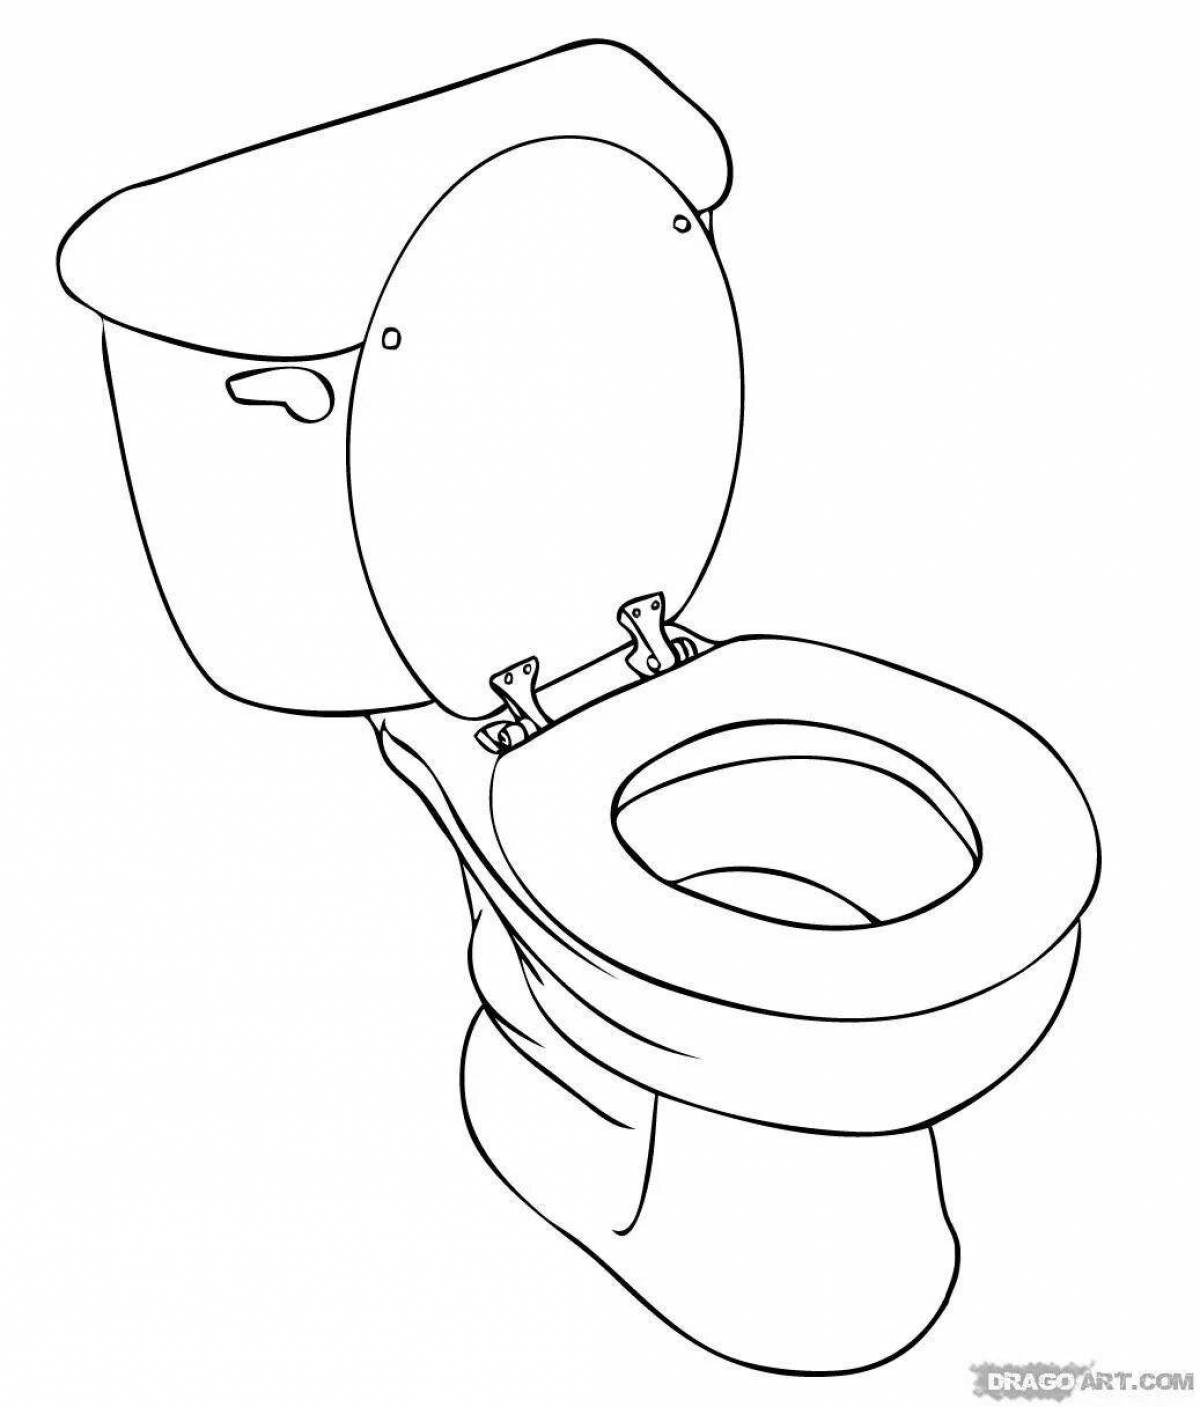 A fun toilet coloring book for kids